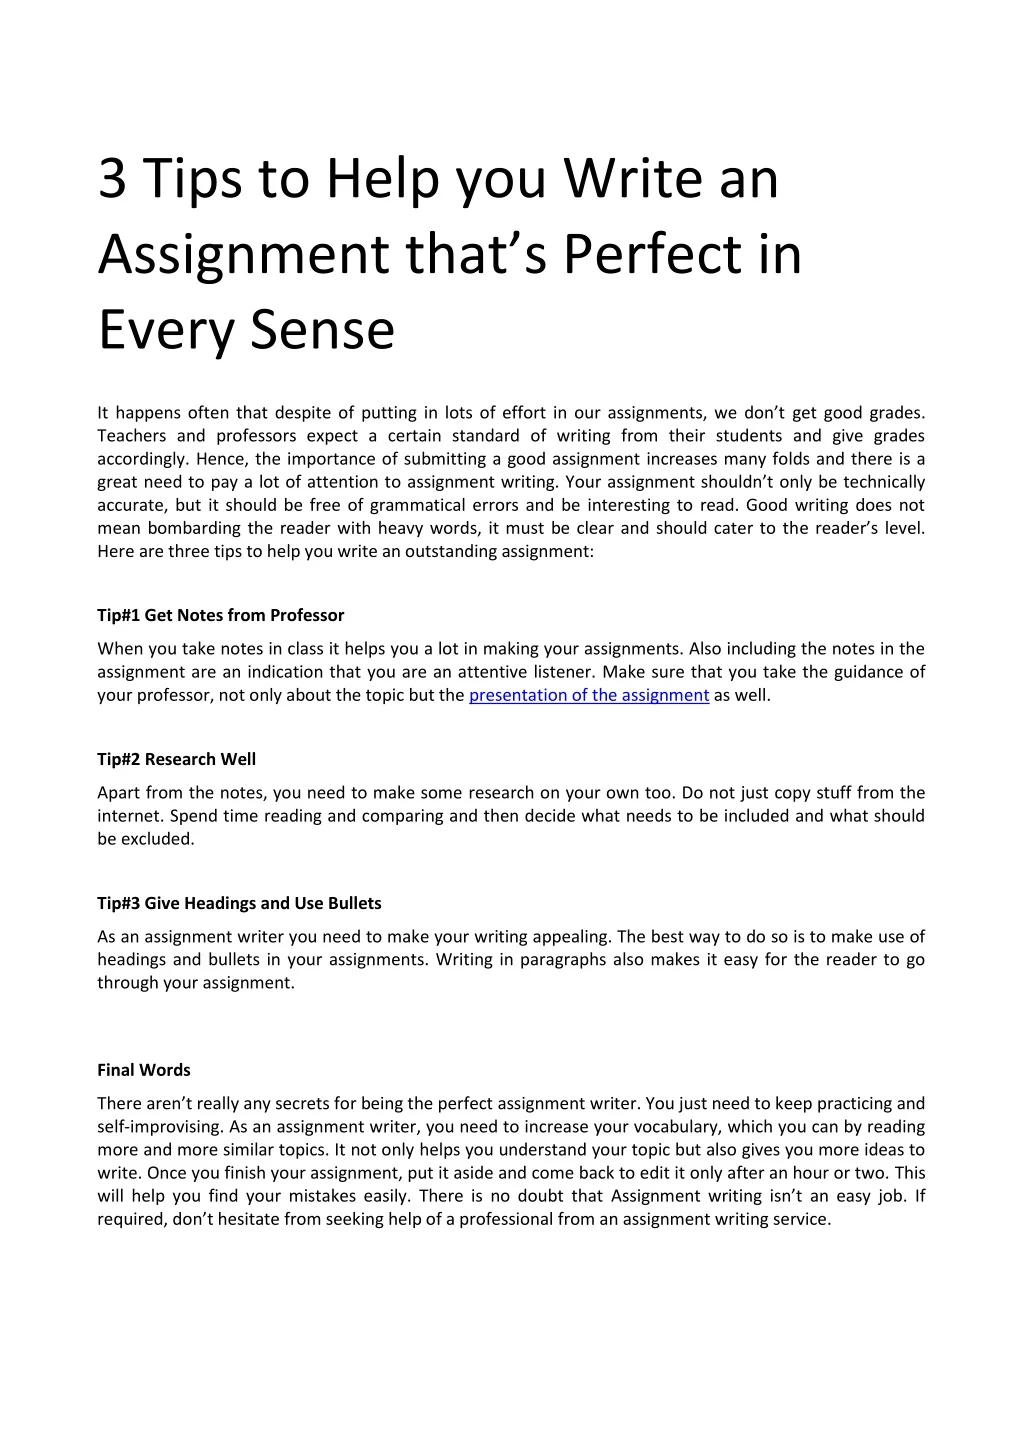 3 tips to help you write an assignment that